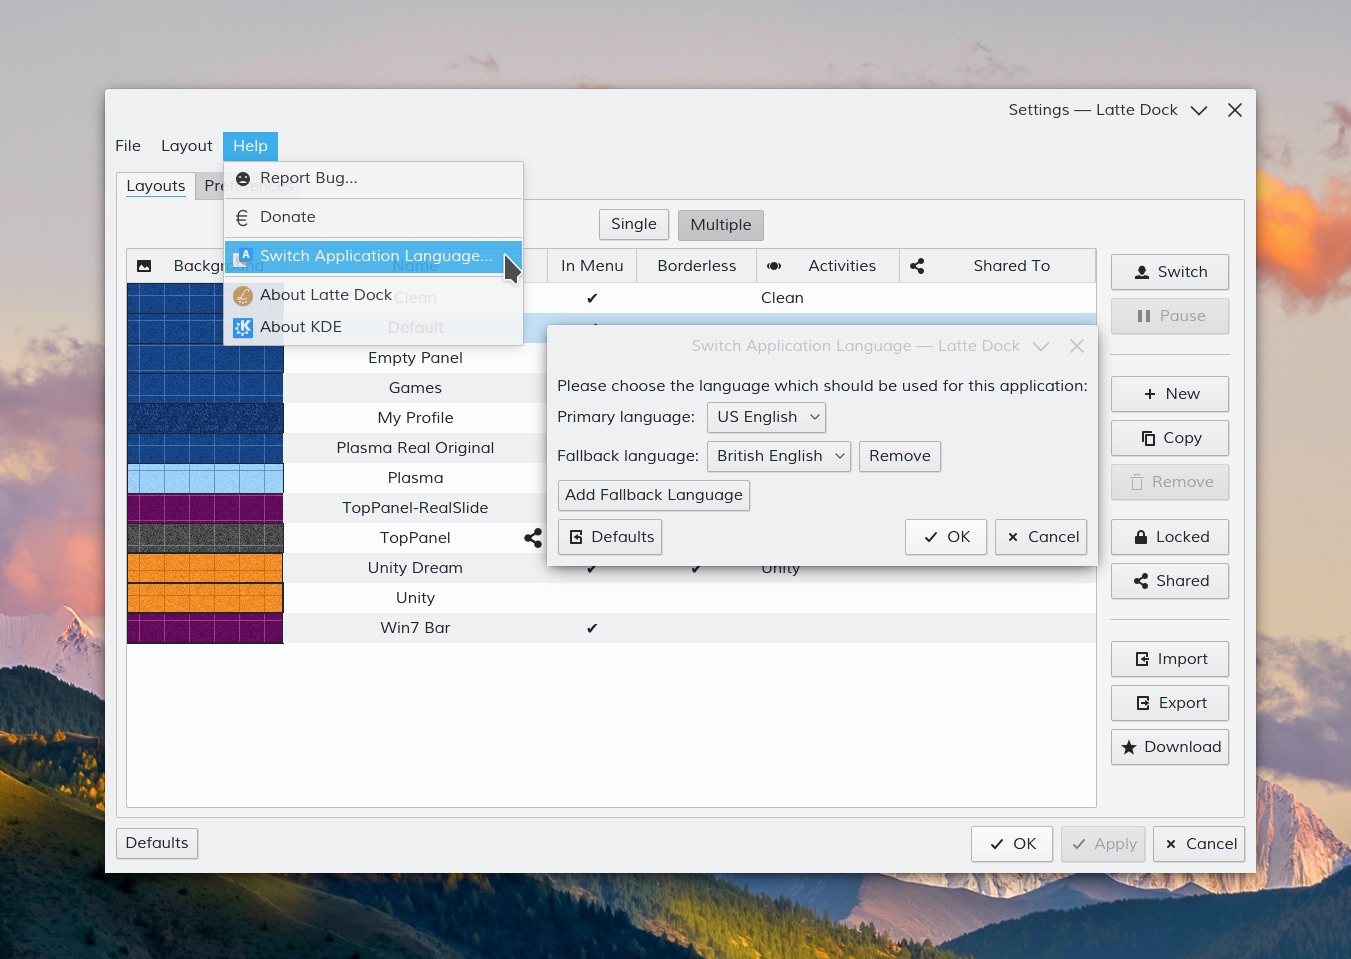 KDE Ships February 2020 Applications Update, Here’s What’s New